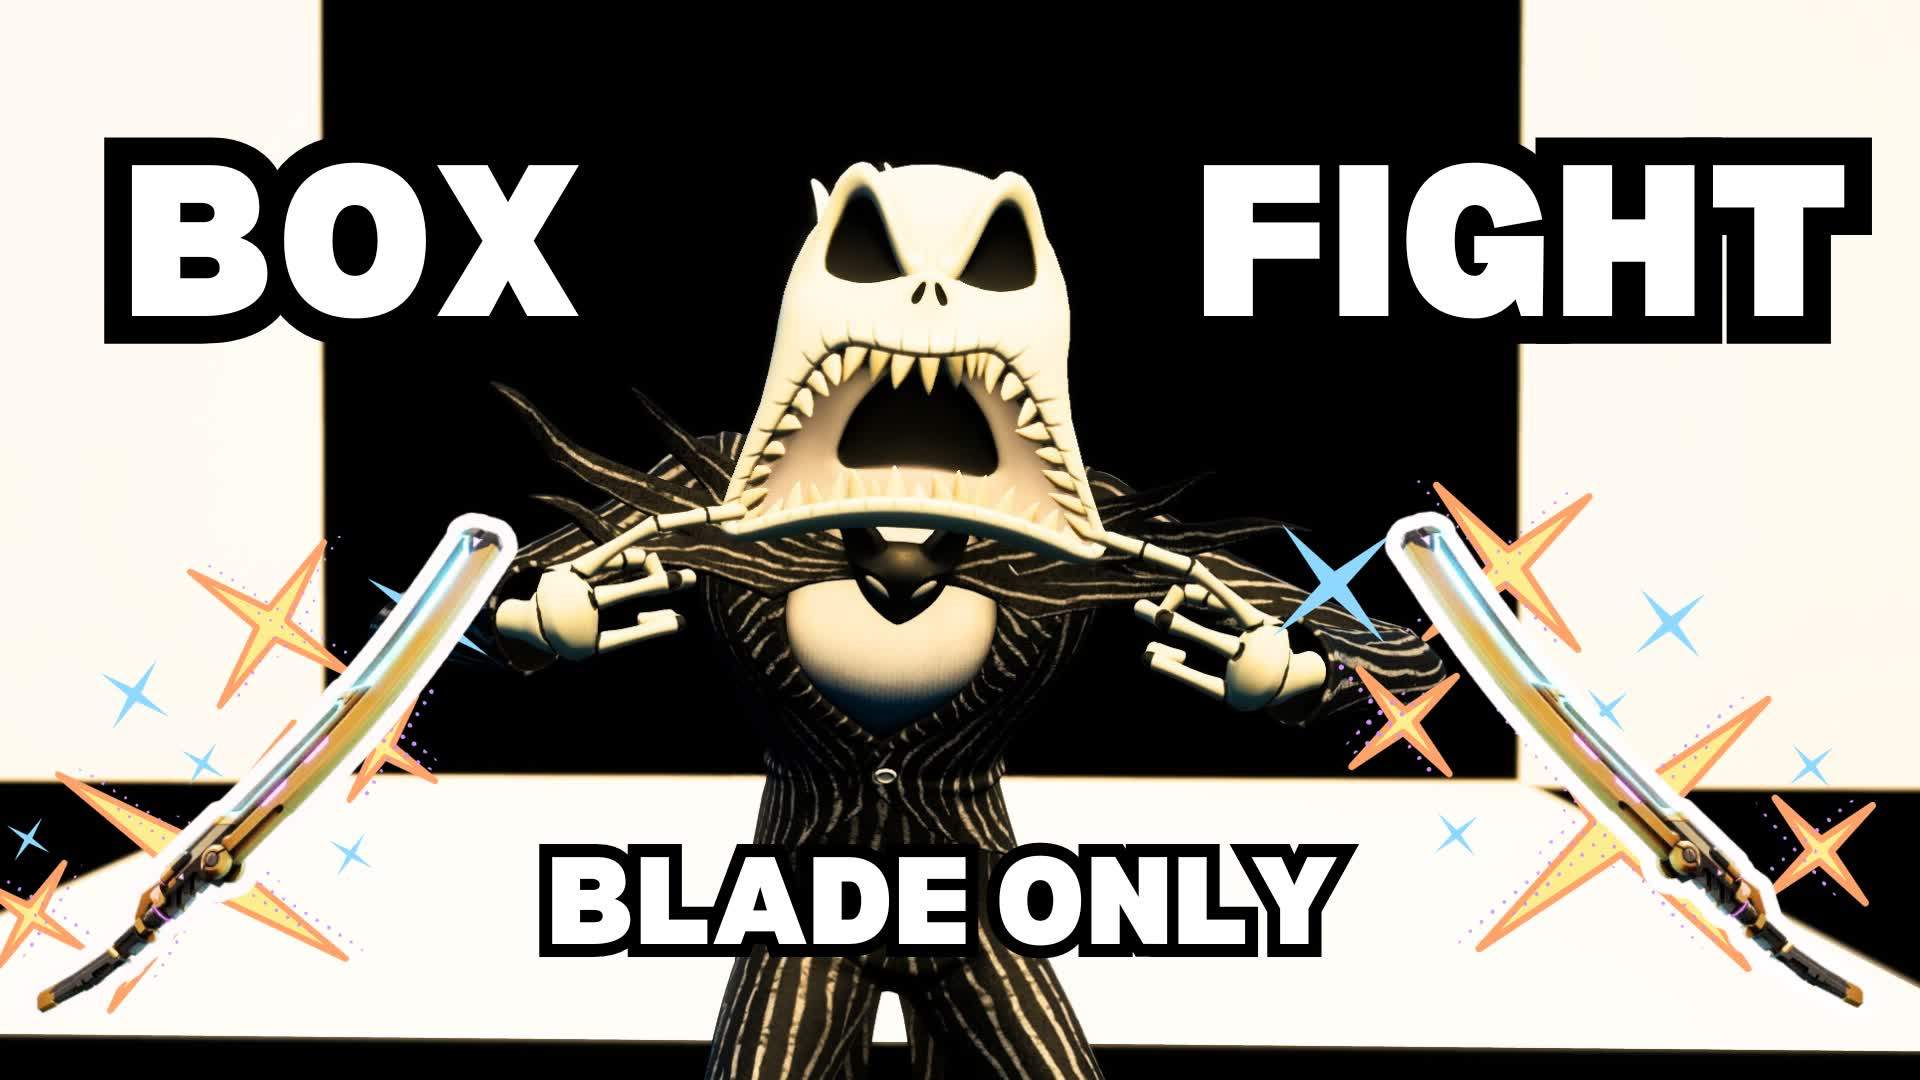 BOX FIGHT BLADE ONLY - BLACK AND WHITE